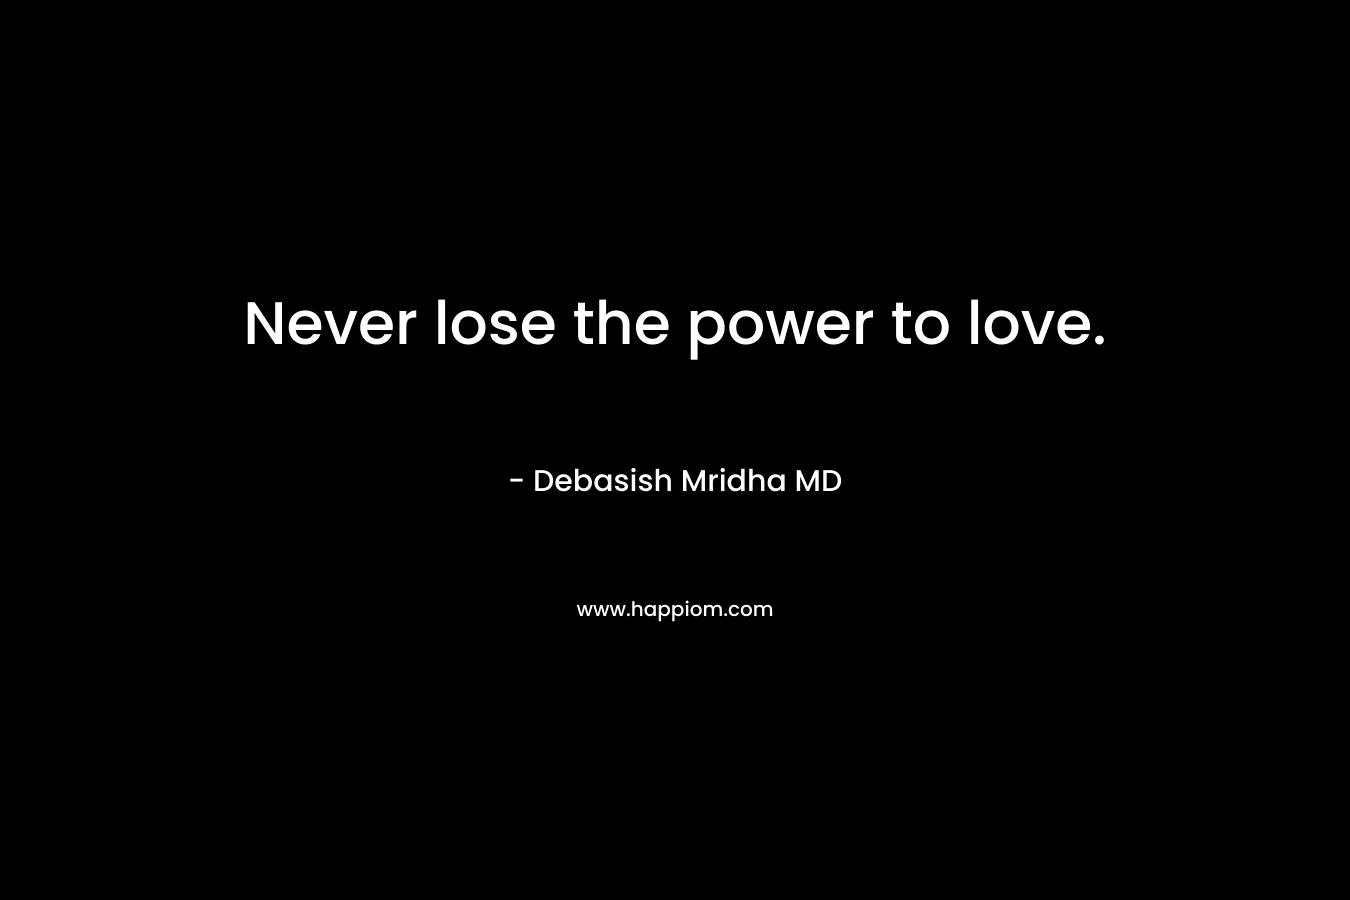 Never lose the power to love.